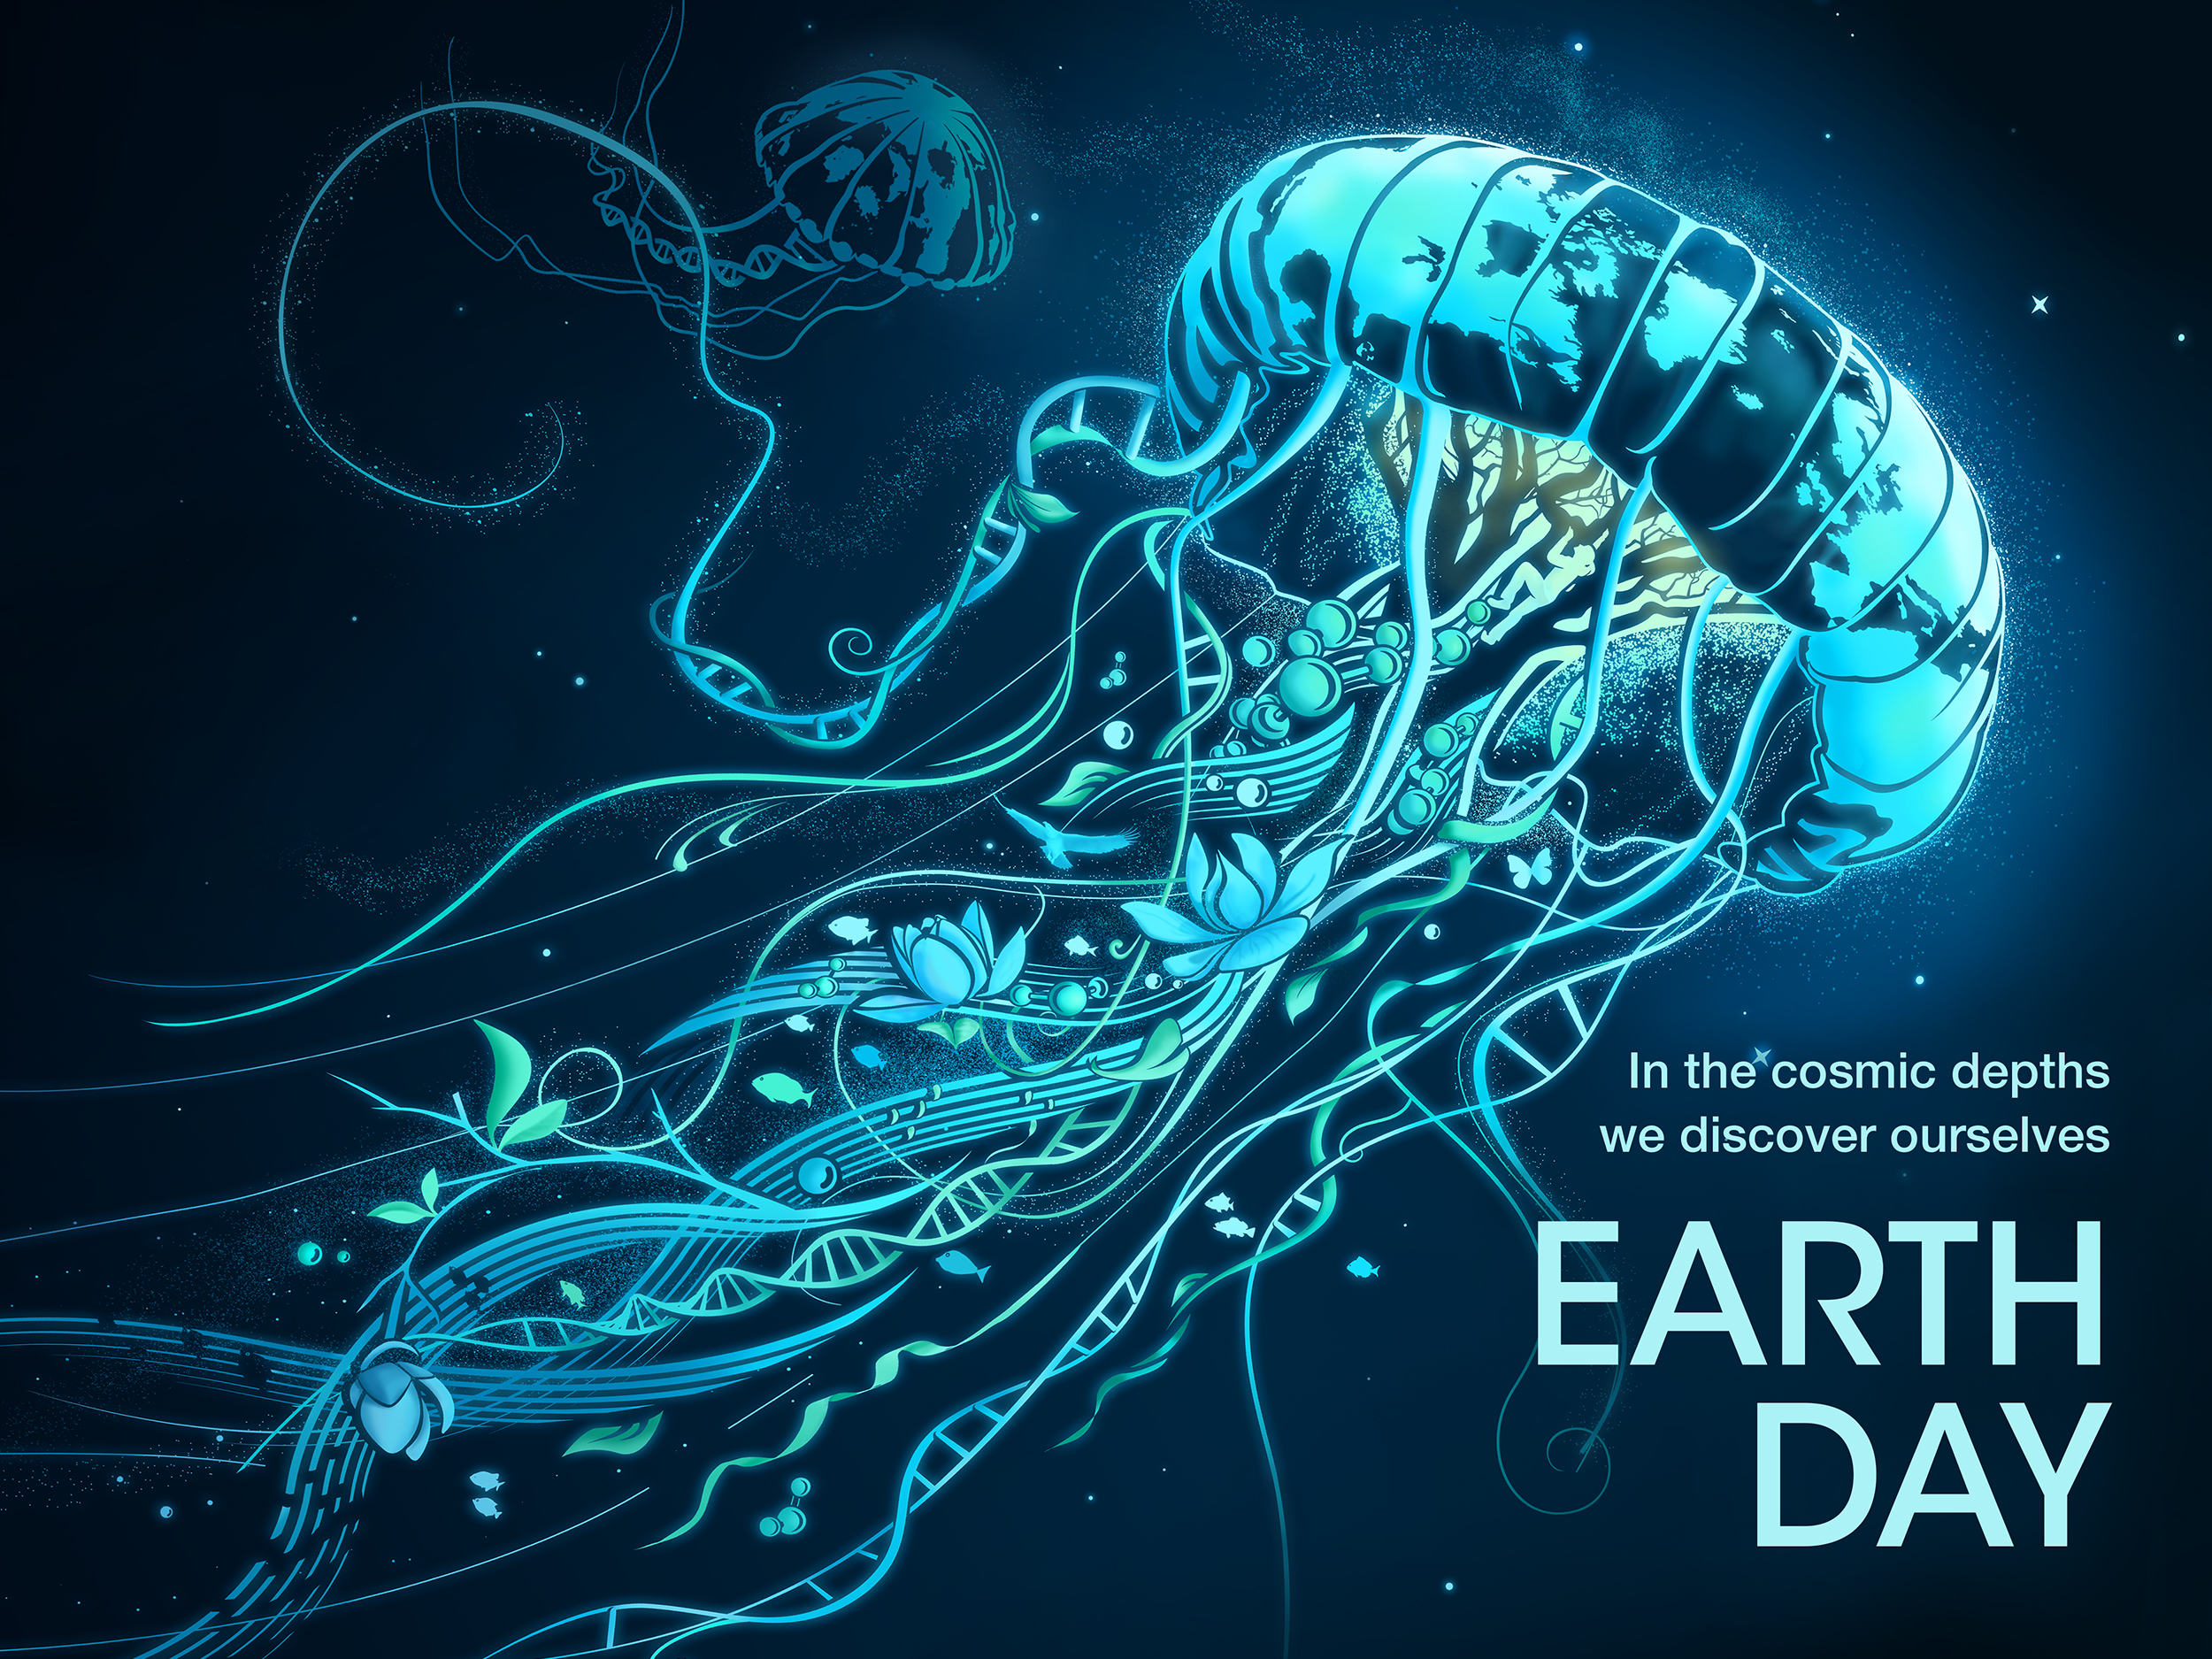 Earth Day 2019 poster